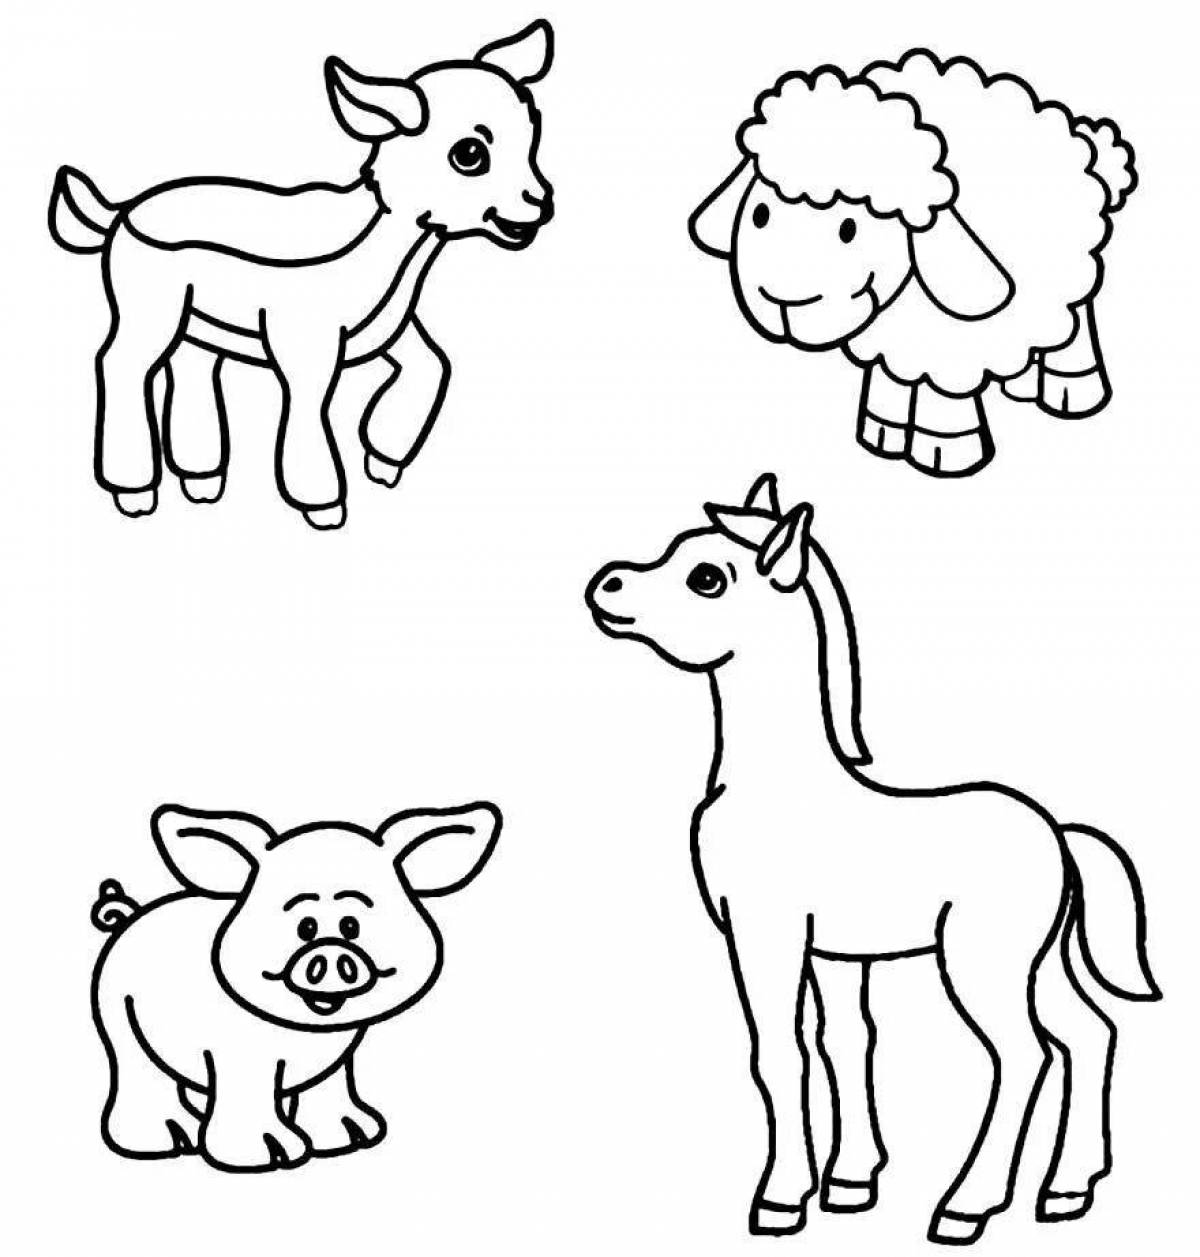 Coloring book for children with animals 3-4 years old